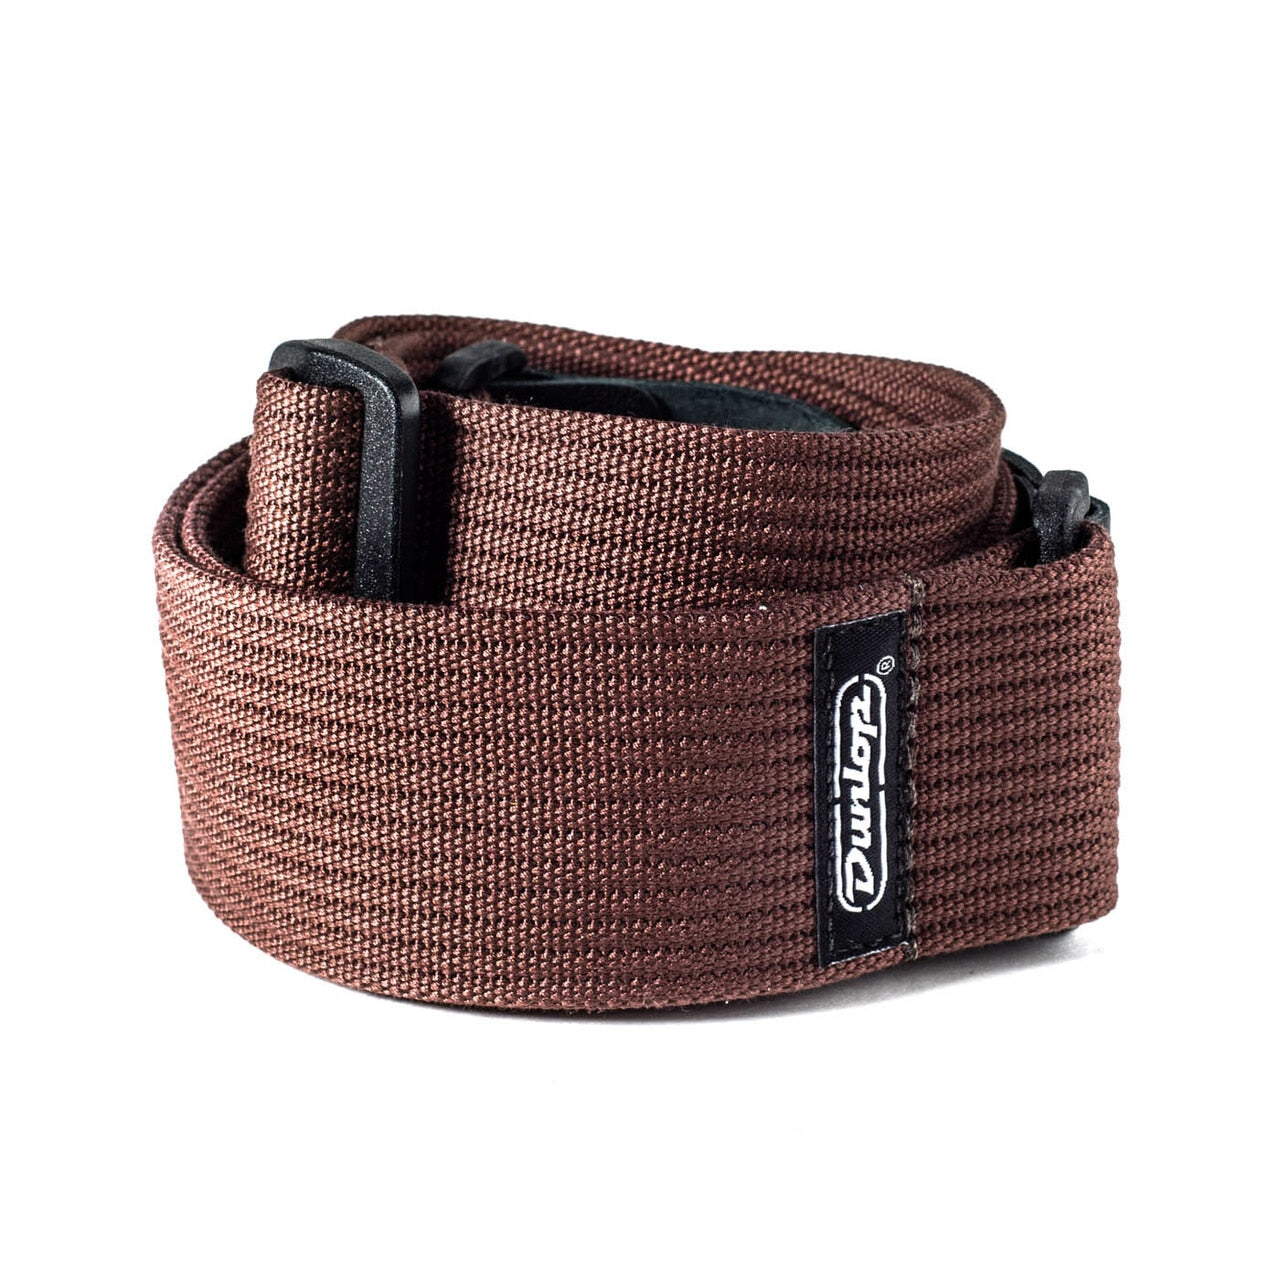 Dunlop Ribbed Cotton Chocolate Strap (D2701BR)